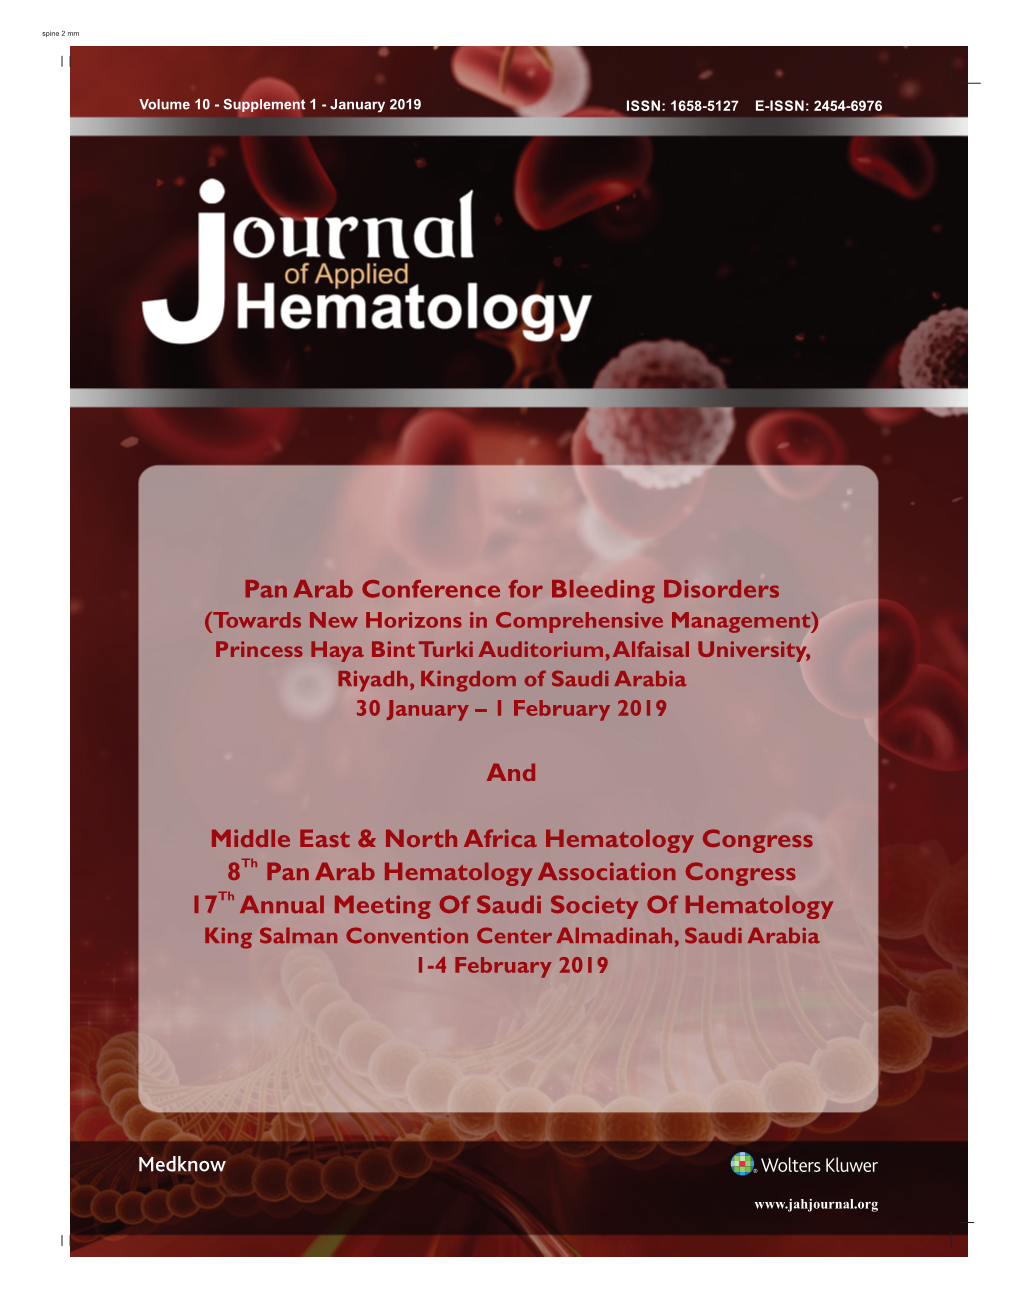 Download Abstracts at Journal of Applied Hematology